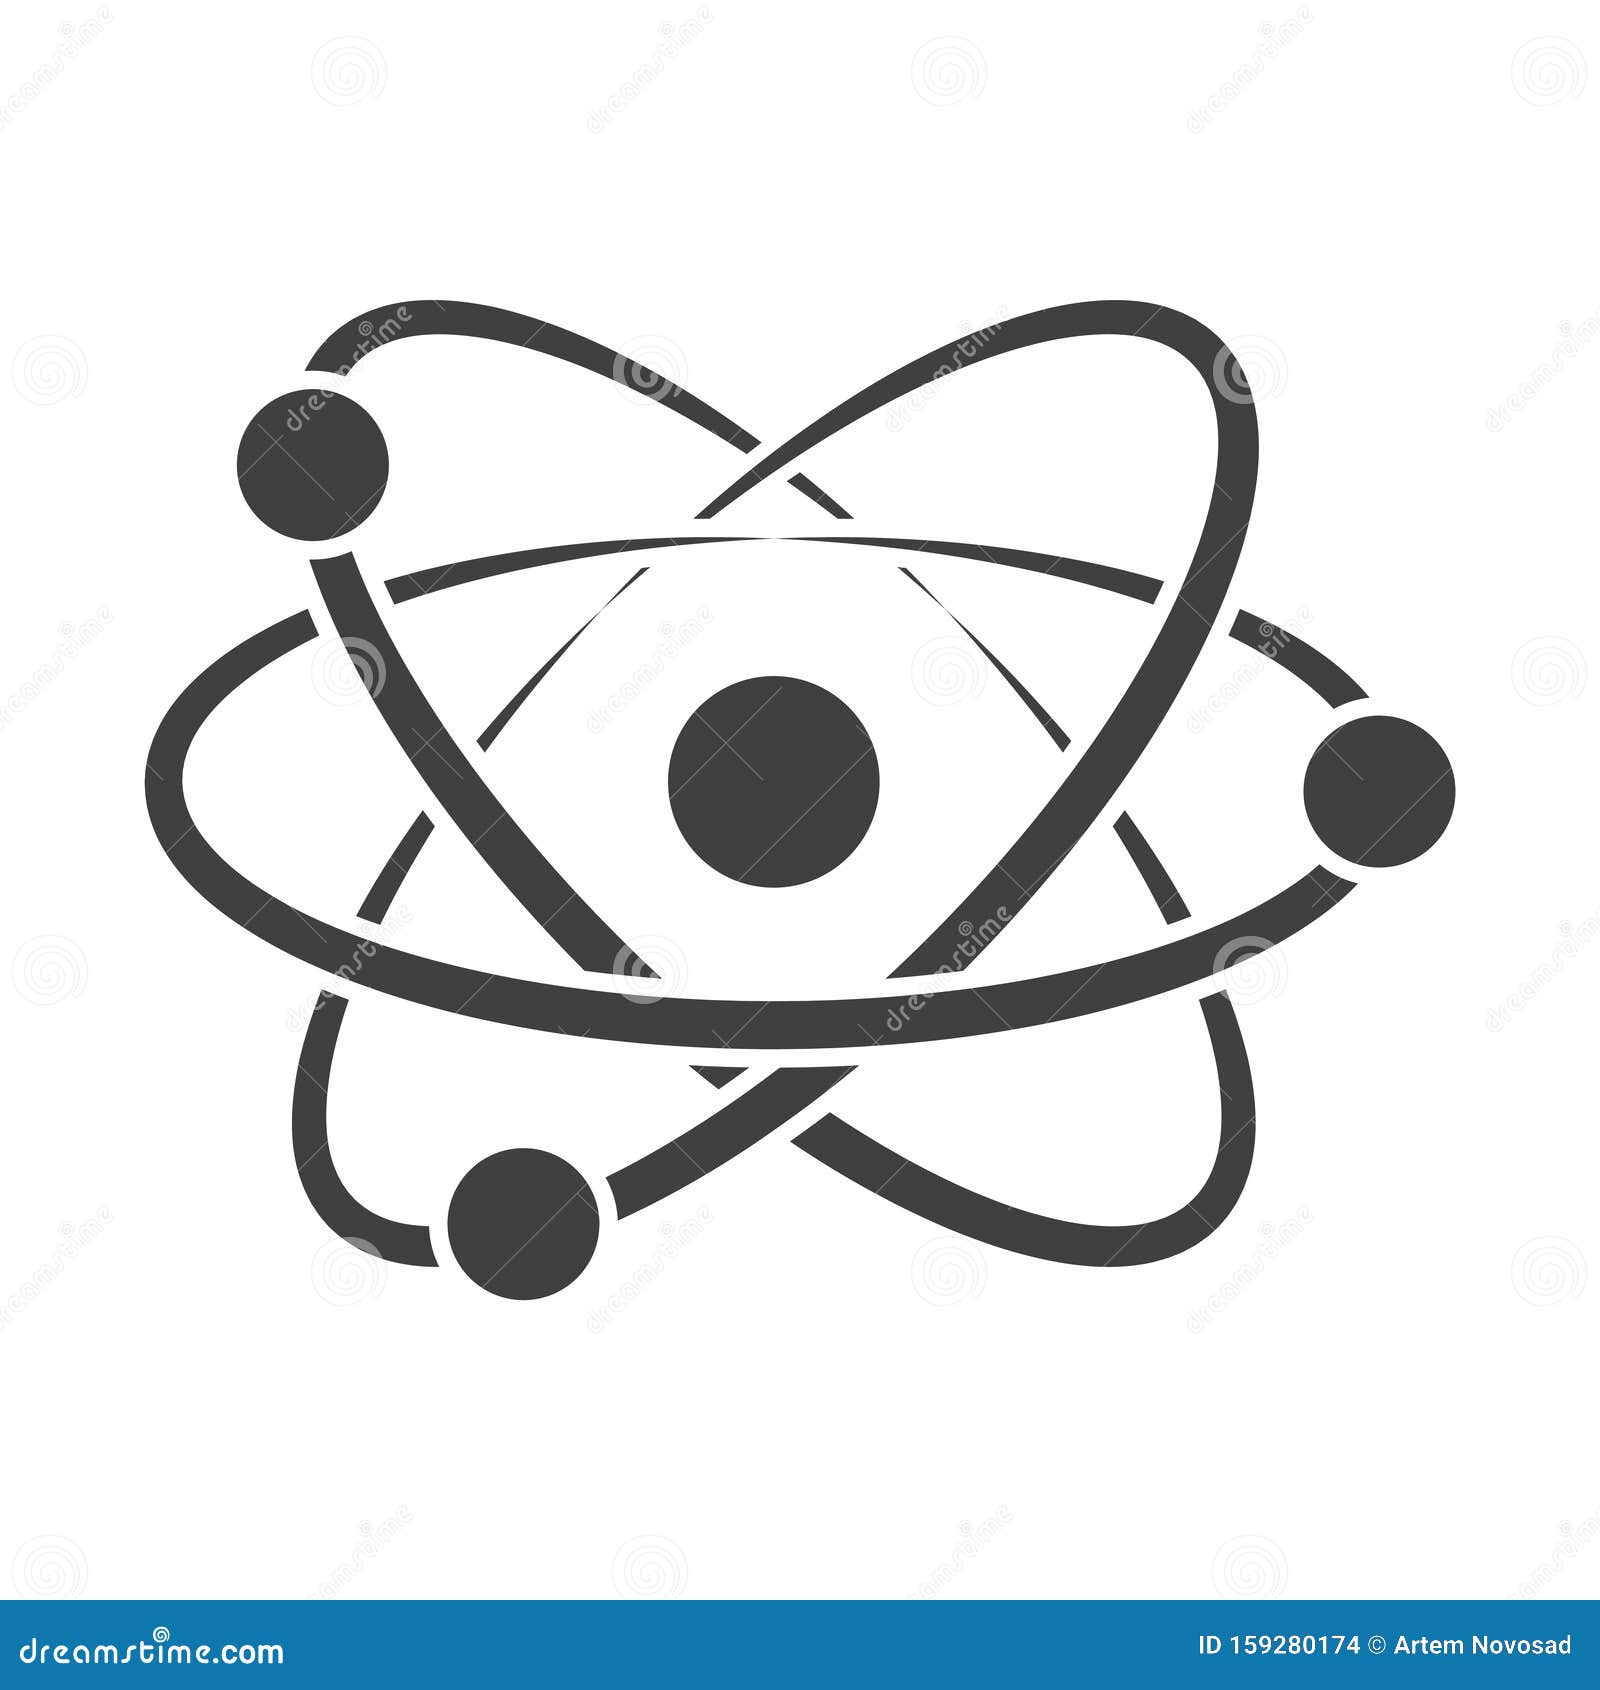 icon structure of the atomic nucleus.  on a white background.